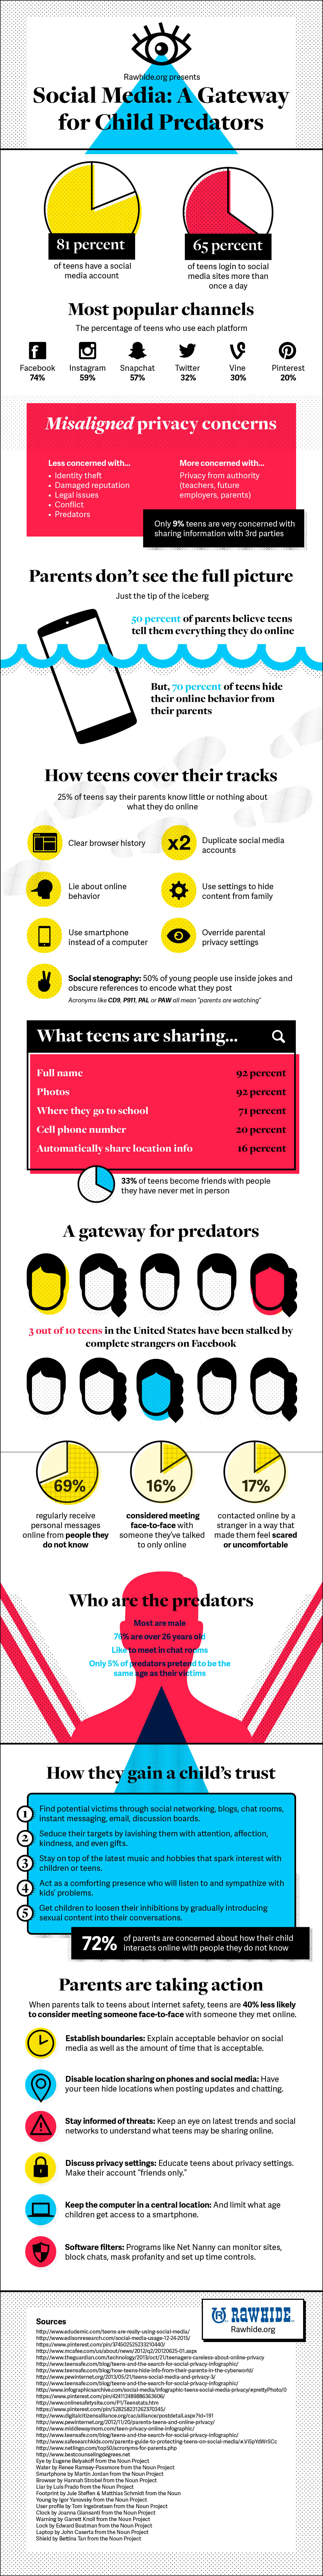 Rawhide-Privacy-Infographic-20151124-01-3